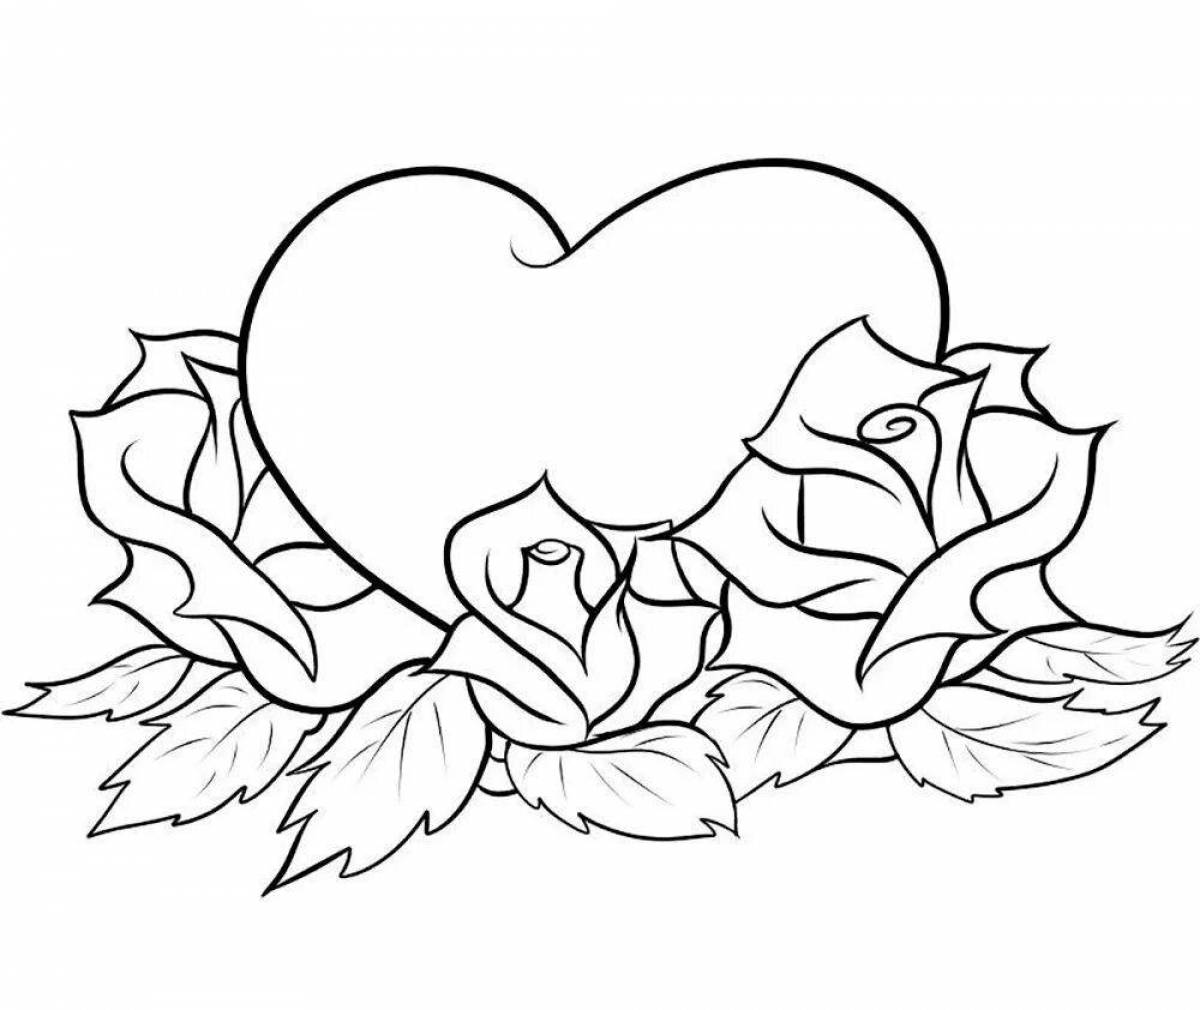 Color-lively pencil drawing coloring page